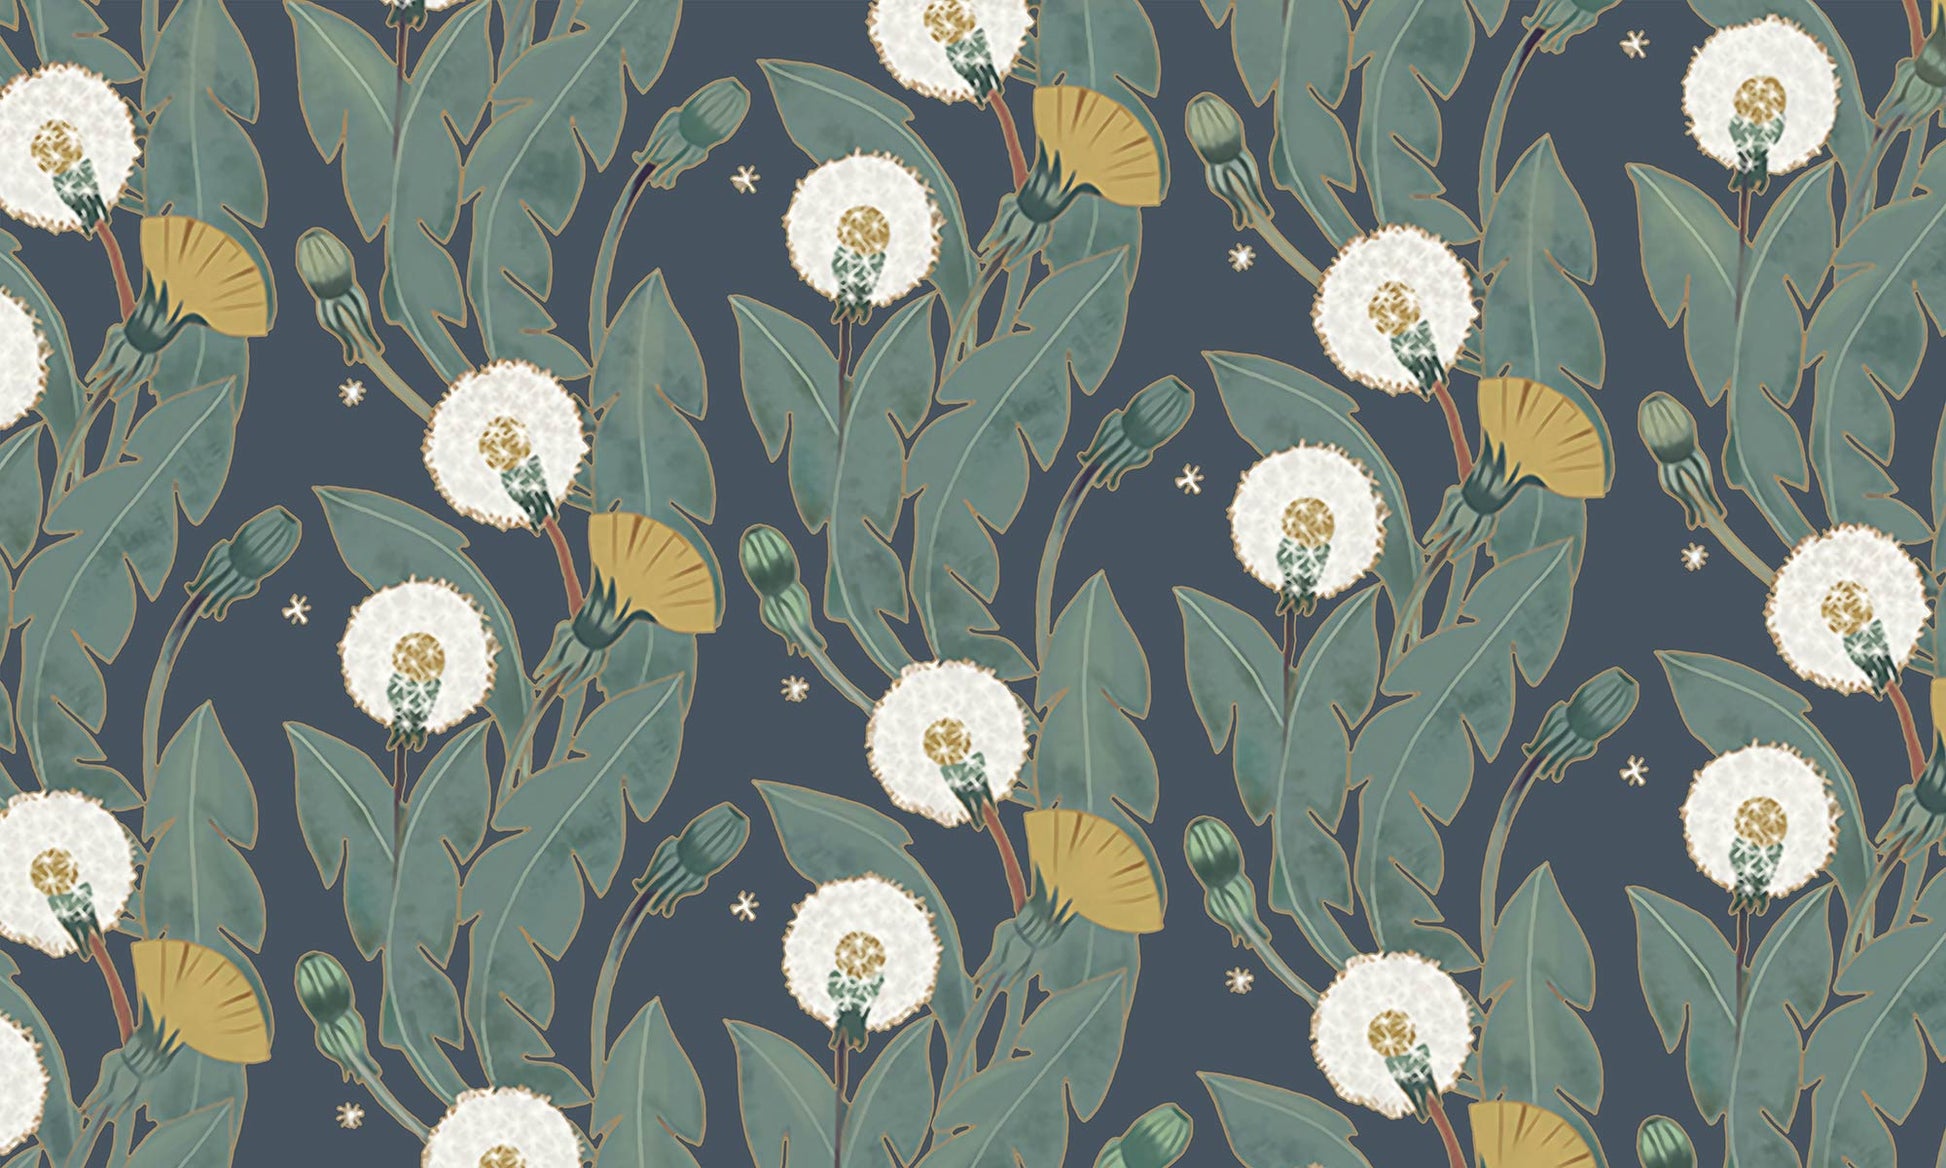 Wallpaper mural with dandelions and leaves, suitable for use in home decor